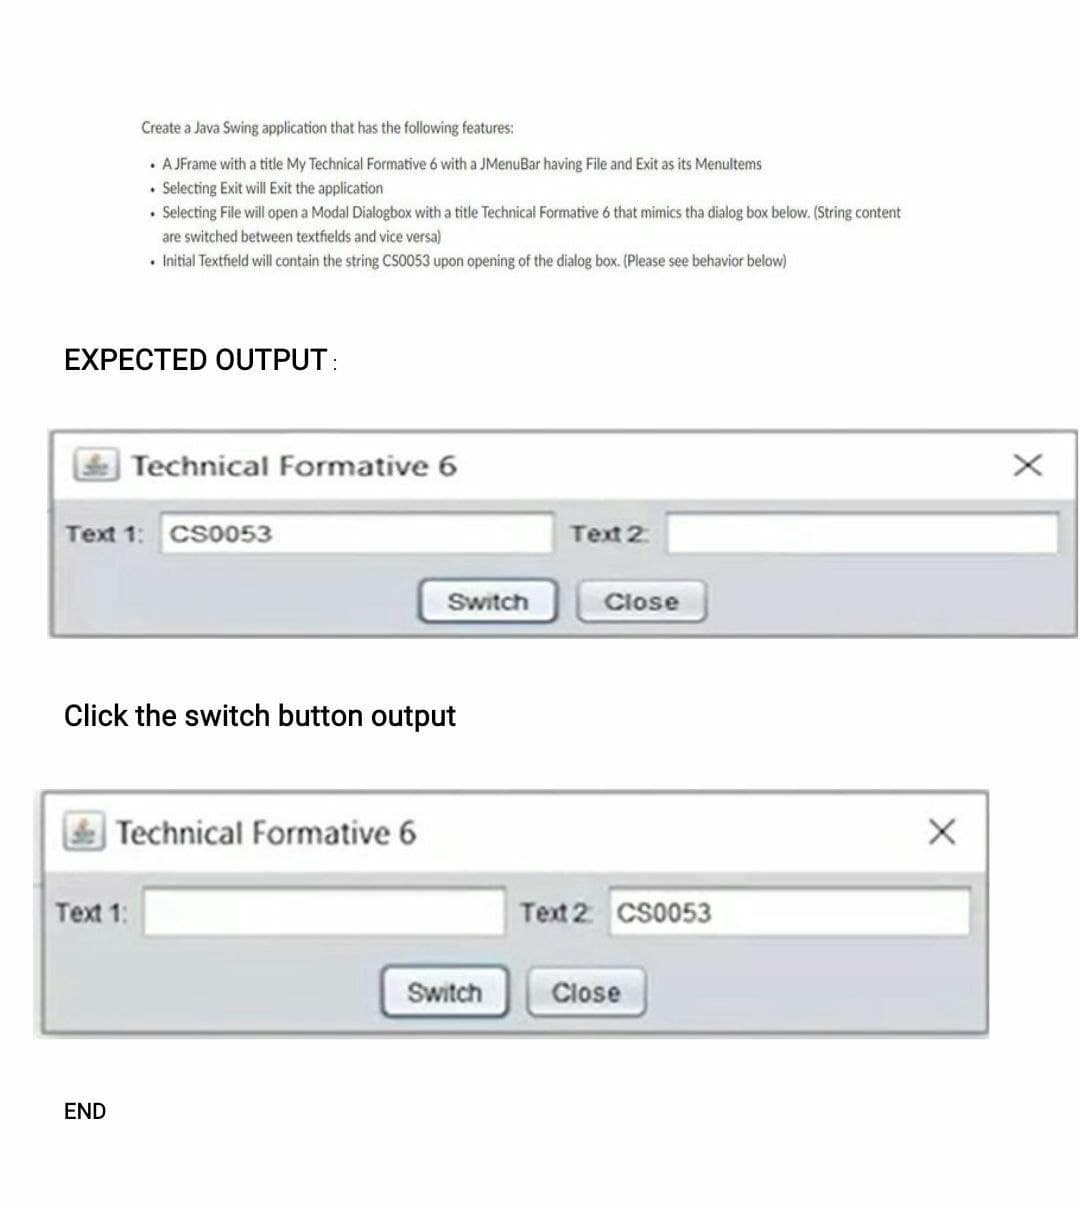 EXPECTED OUTPUT:
Create a Java Swing application that has the following features:
. A JFrame with a title My Technical Formative 6 with a JMenuBar having File and Exit as its Menultems
• Selecting Exit will Exit the application
. Selecting File will open a Modal Dialogbox with a title Technical Formative 6 that mimics tha dialog box below. (String content
are switched between textfields and vice versa)
• Initial Textfield will contain the string CS0053 upon opening of the dialog box. (Please see behavior below)
Text 1: CS0053
Technical Formative 6
Text 1:
END
Click the switch button output
Technical Formative 6
Switch
Text 2
Close
Text 2 CS0053
Switch Close
X
X